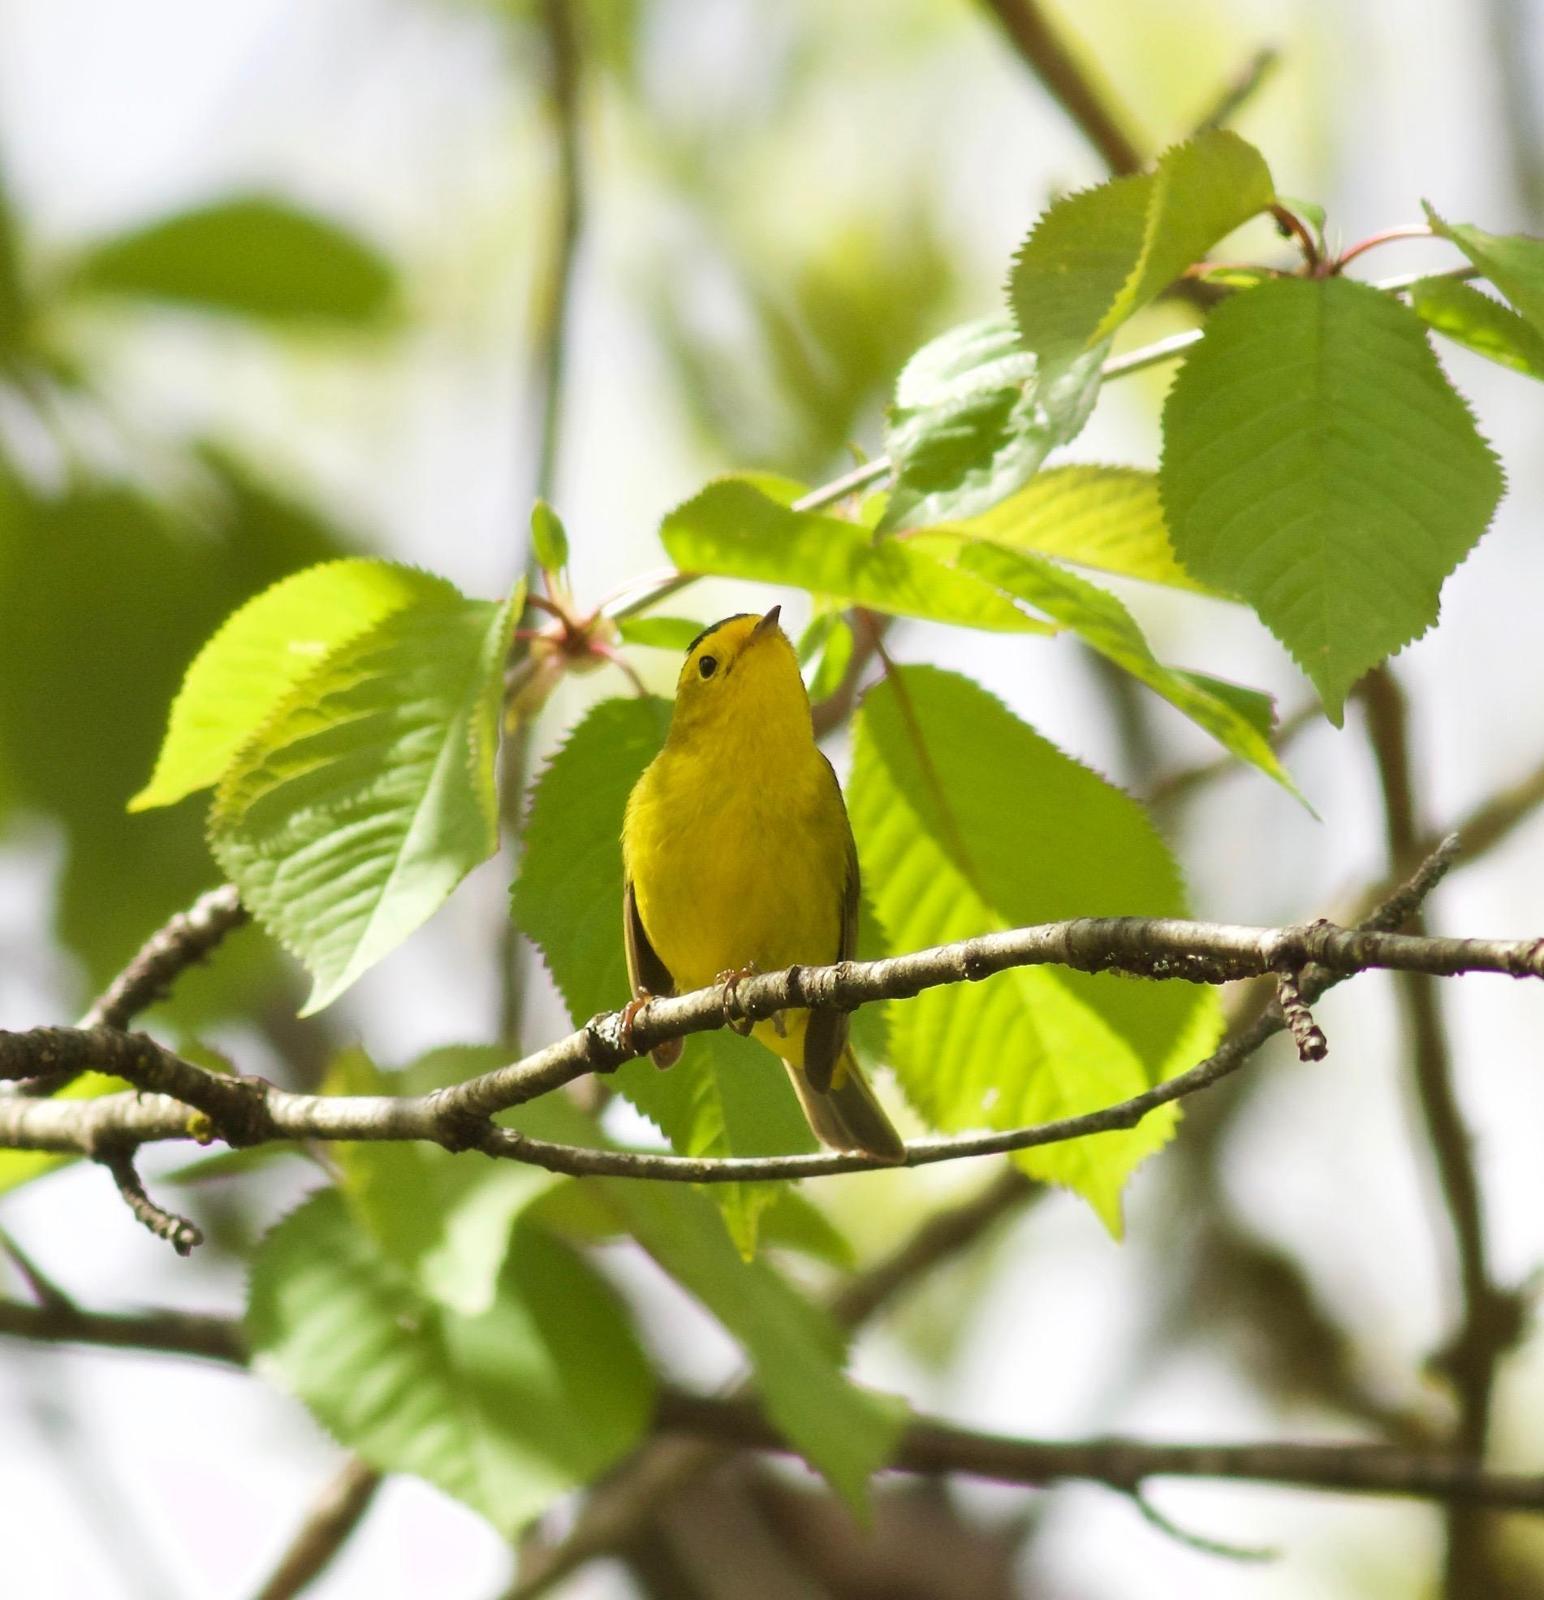 Wilson's Warbler Photo by Kathryn Keith